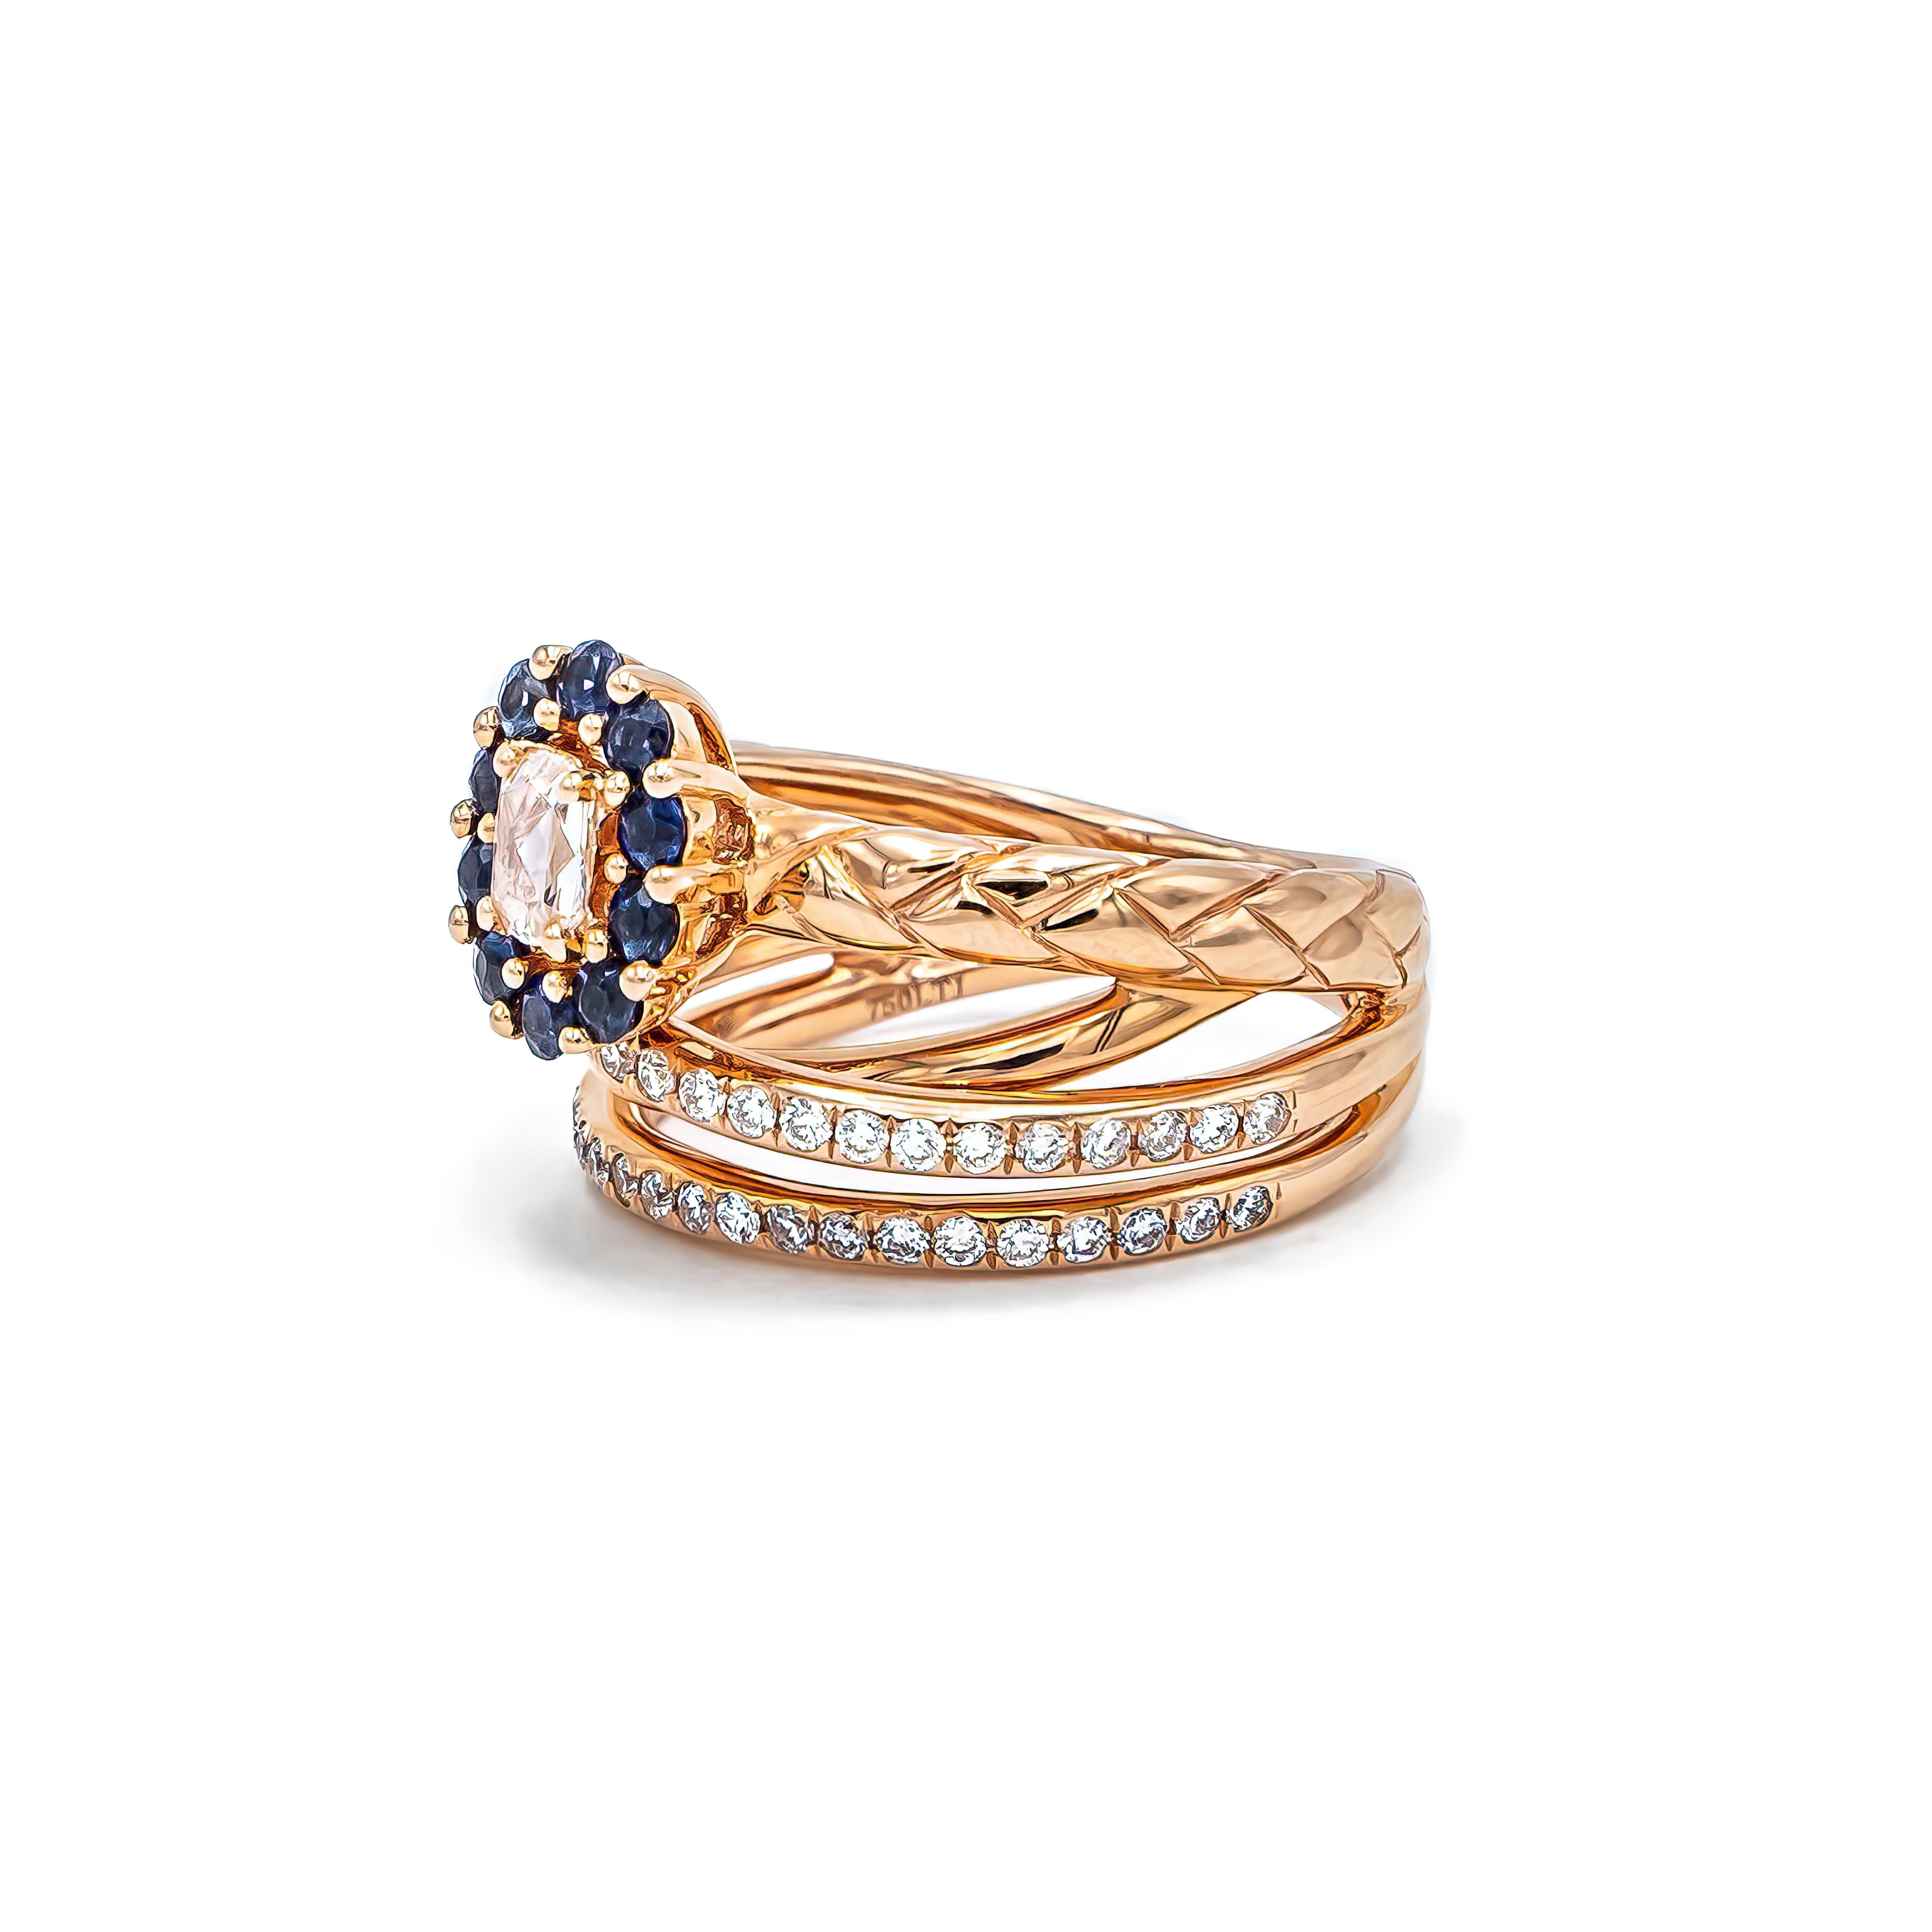 Total Ring Carat Weight: 0.99ct
Diamond Clarity: VS1
Diamond Color: G
Gold Purity: 18k
Gold Color: Rose
Gold Weight: 8.06g
Diamond & Gemstone Type: Natural Diamond & Gemstone, Conflict-Free

Rose Cut Diamond in Blue Sapphire Halo Set in 18k Gold &